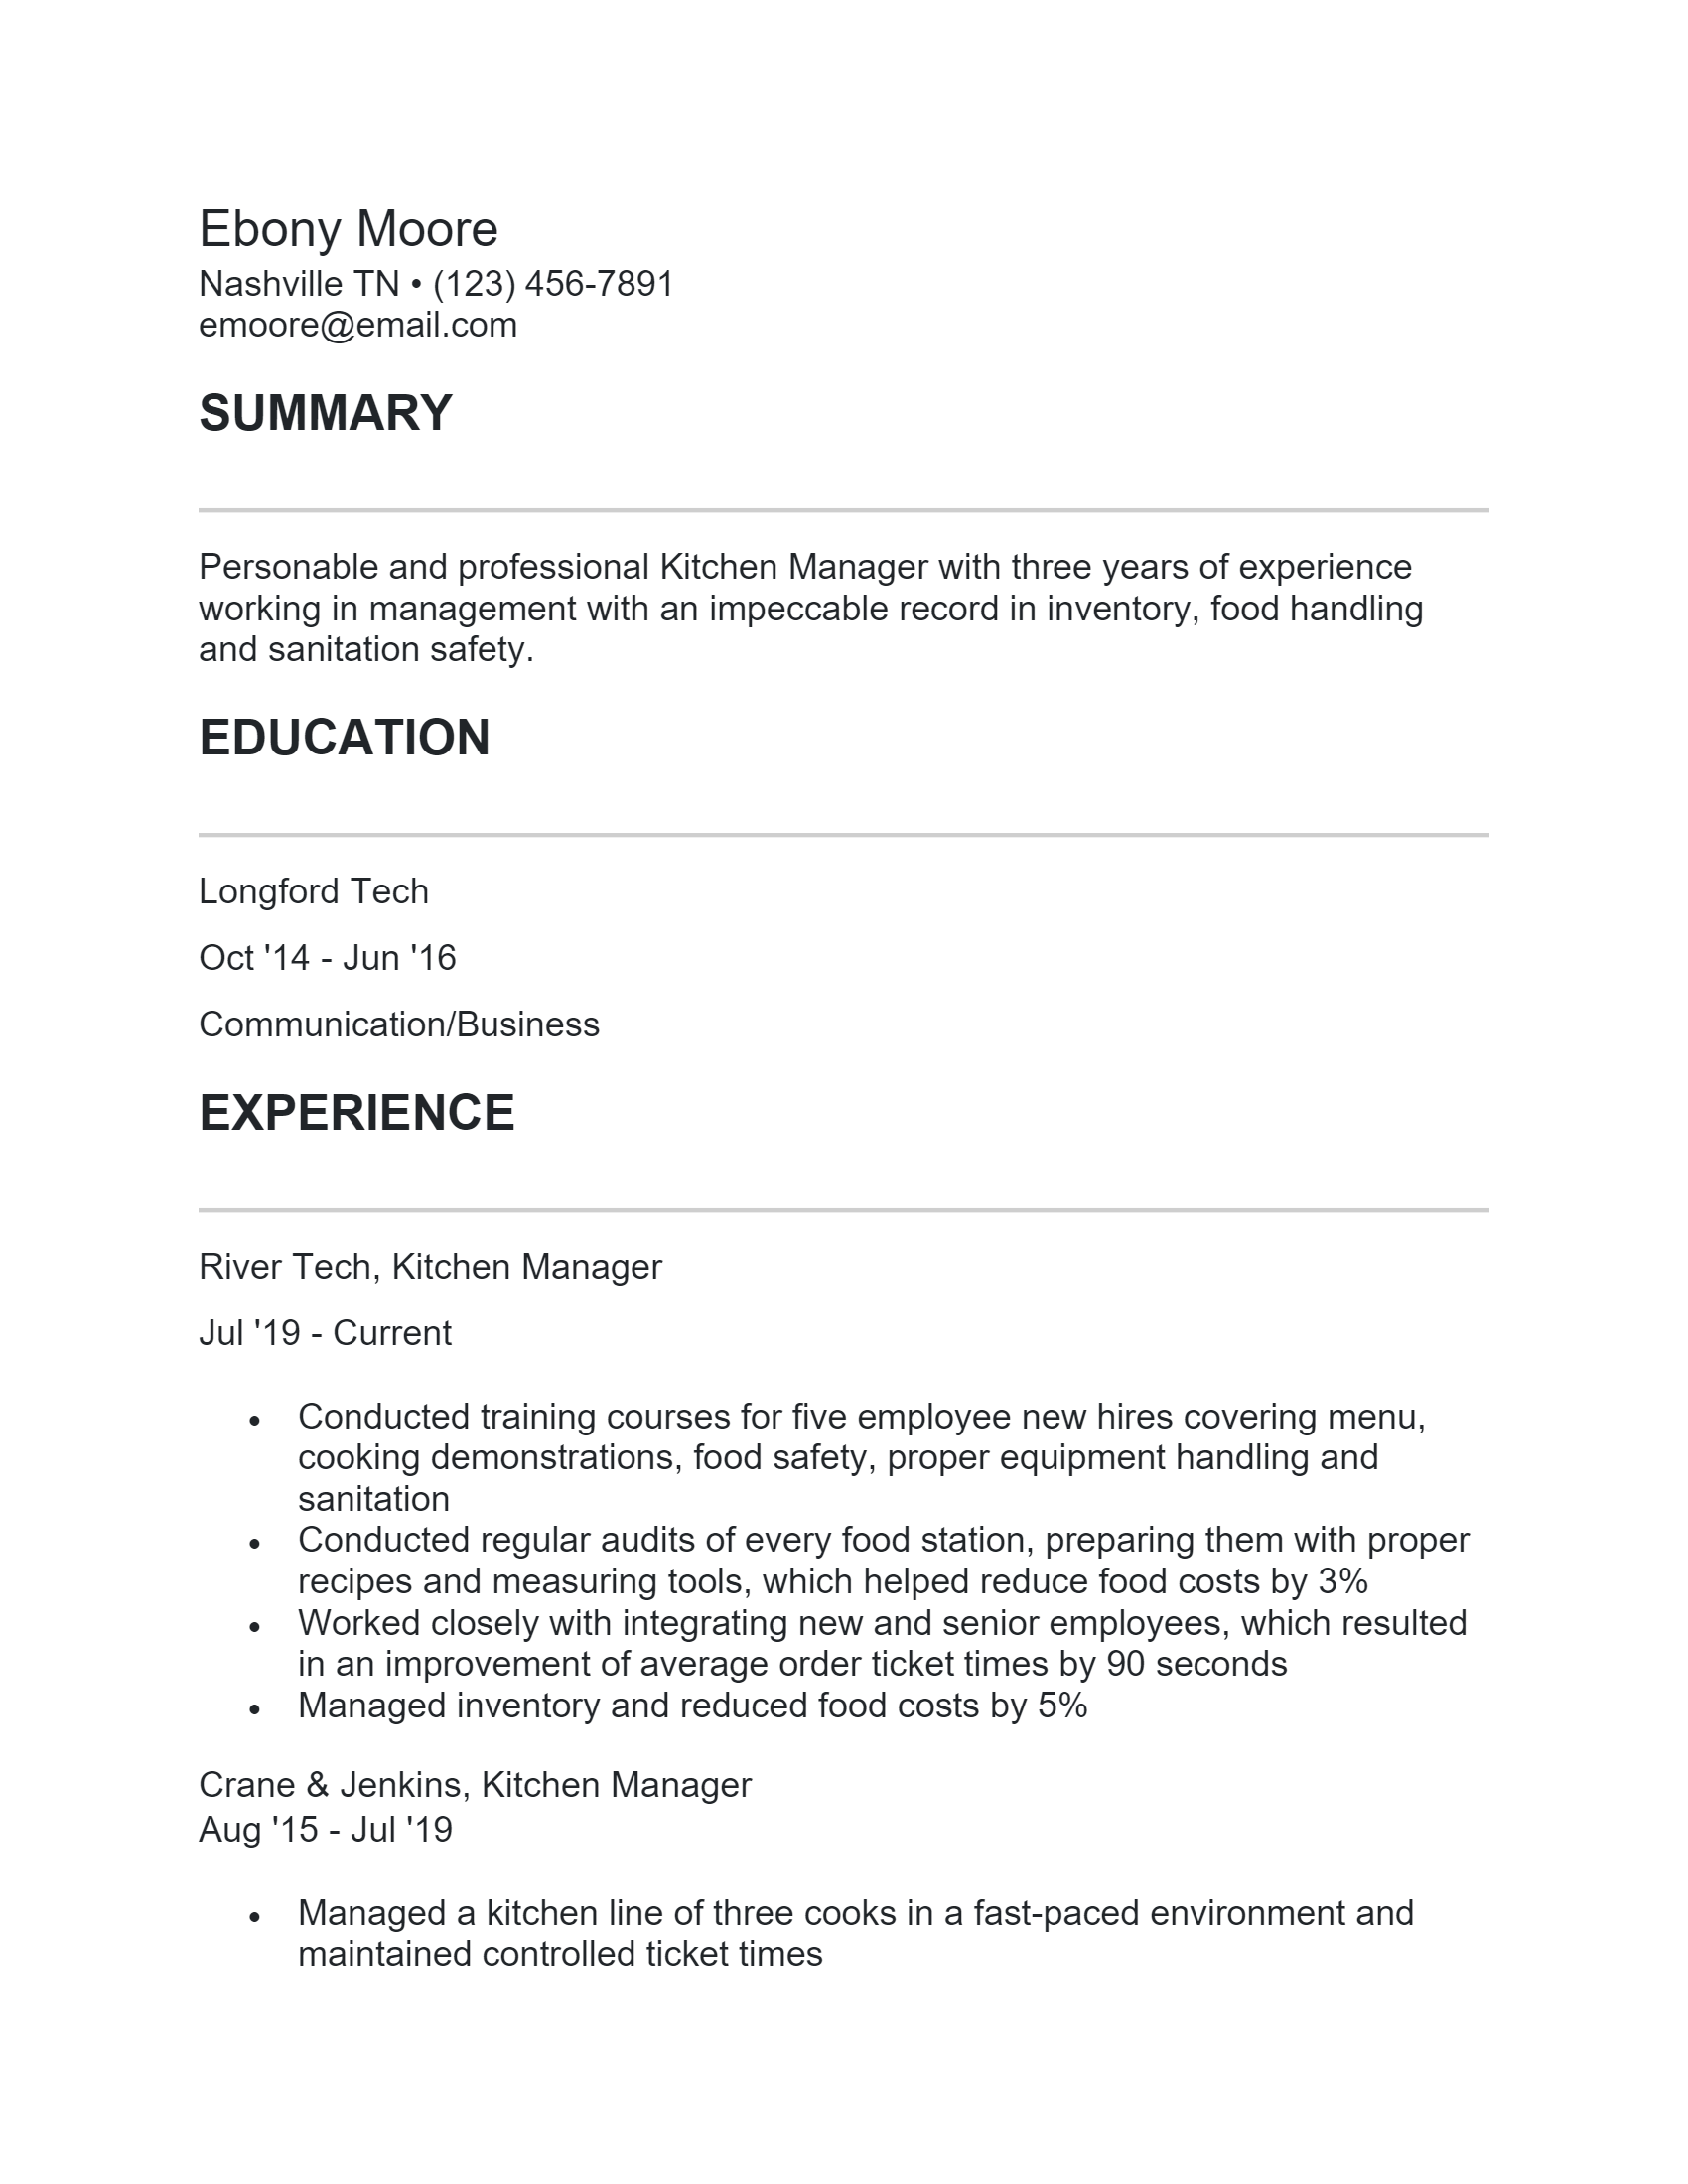 Kitchen Manager. Docx(Word)